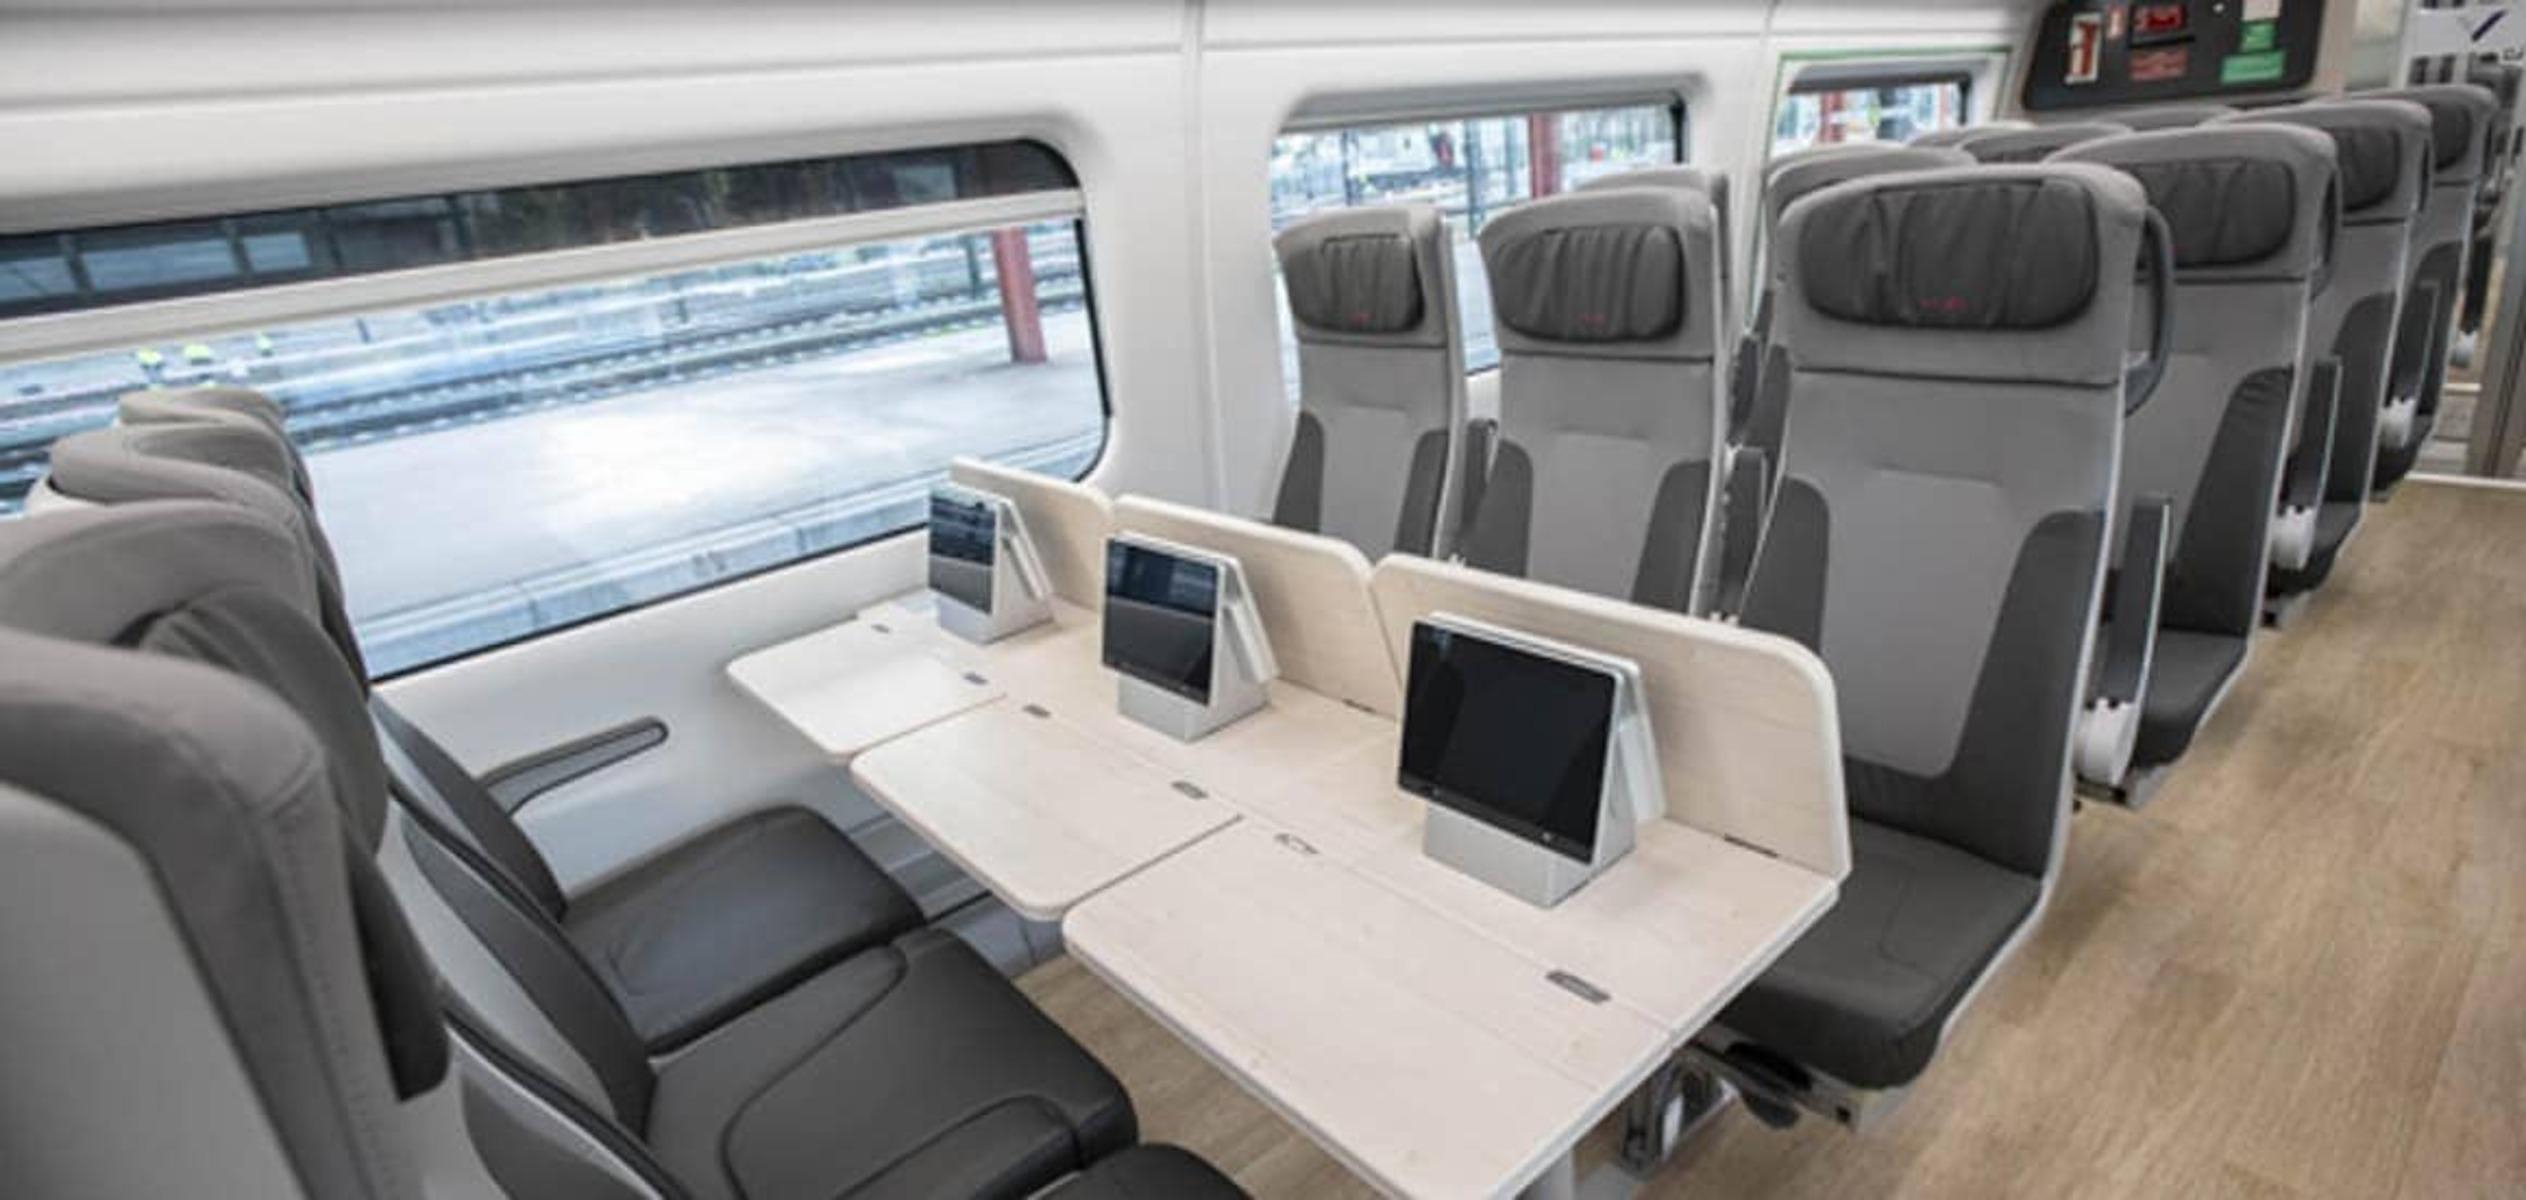 A Spanish company wants to launch TGVs equipped with touch screens for its journeys in France